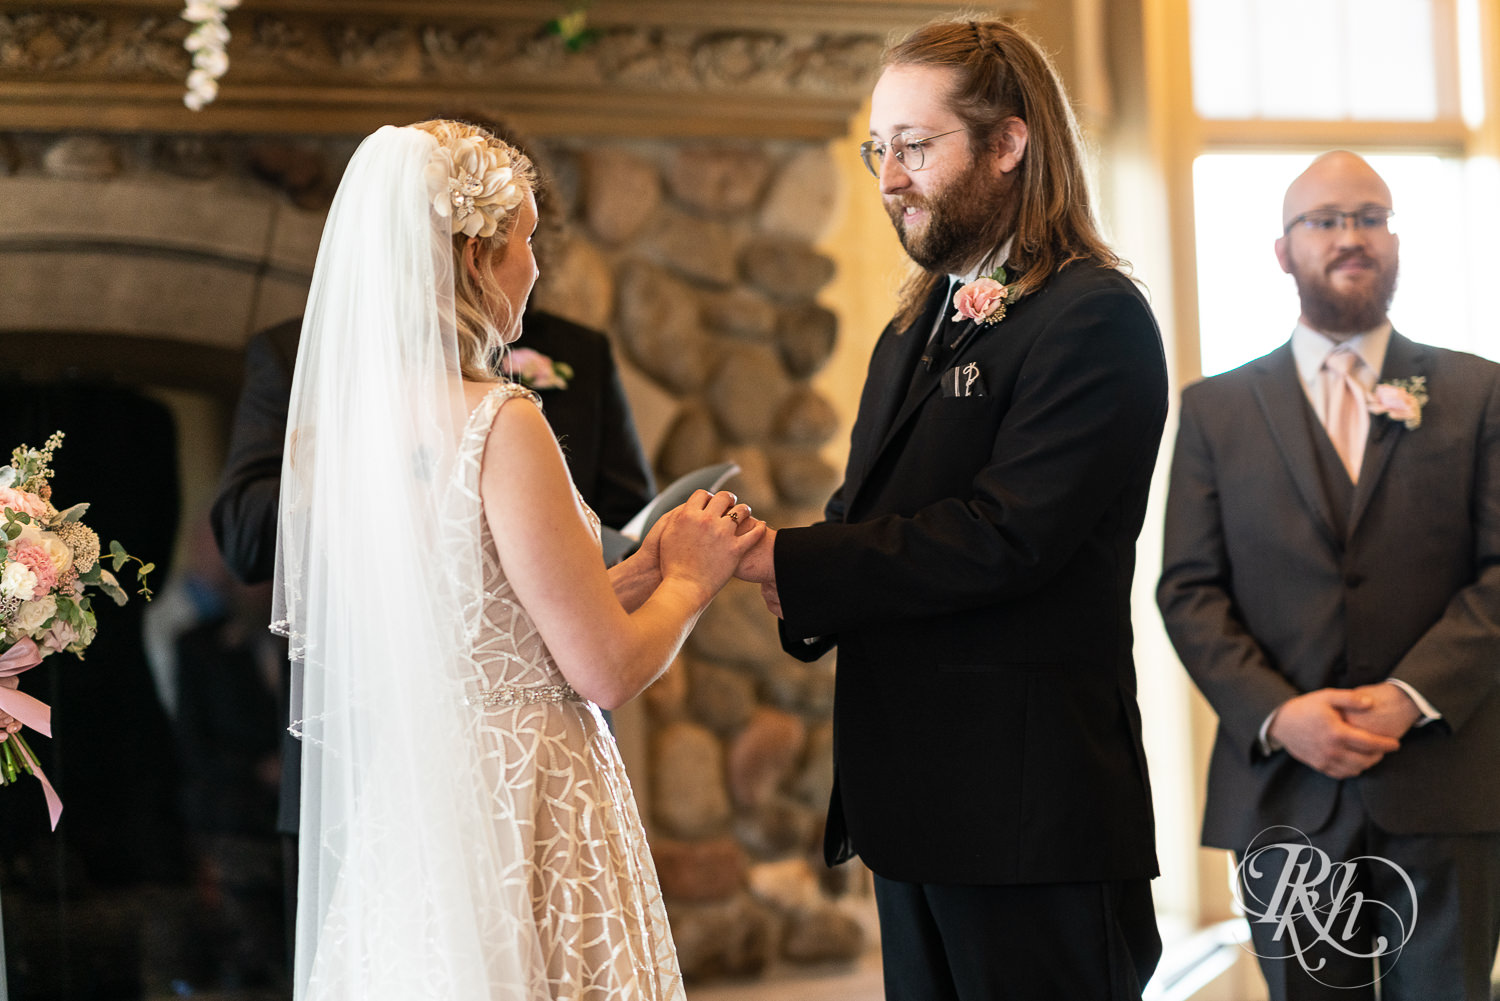 Indoor wedding ceremony takes place at Rush Creek Golf Club in Maple Grove, Minnesota.